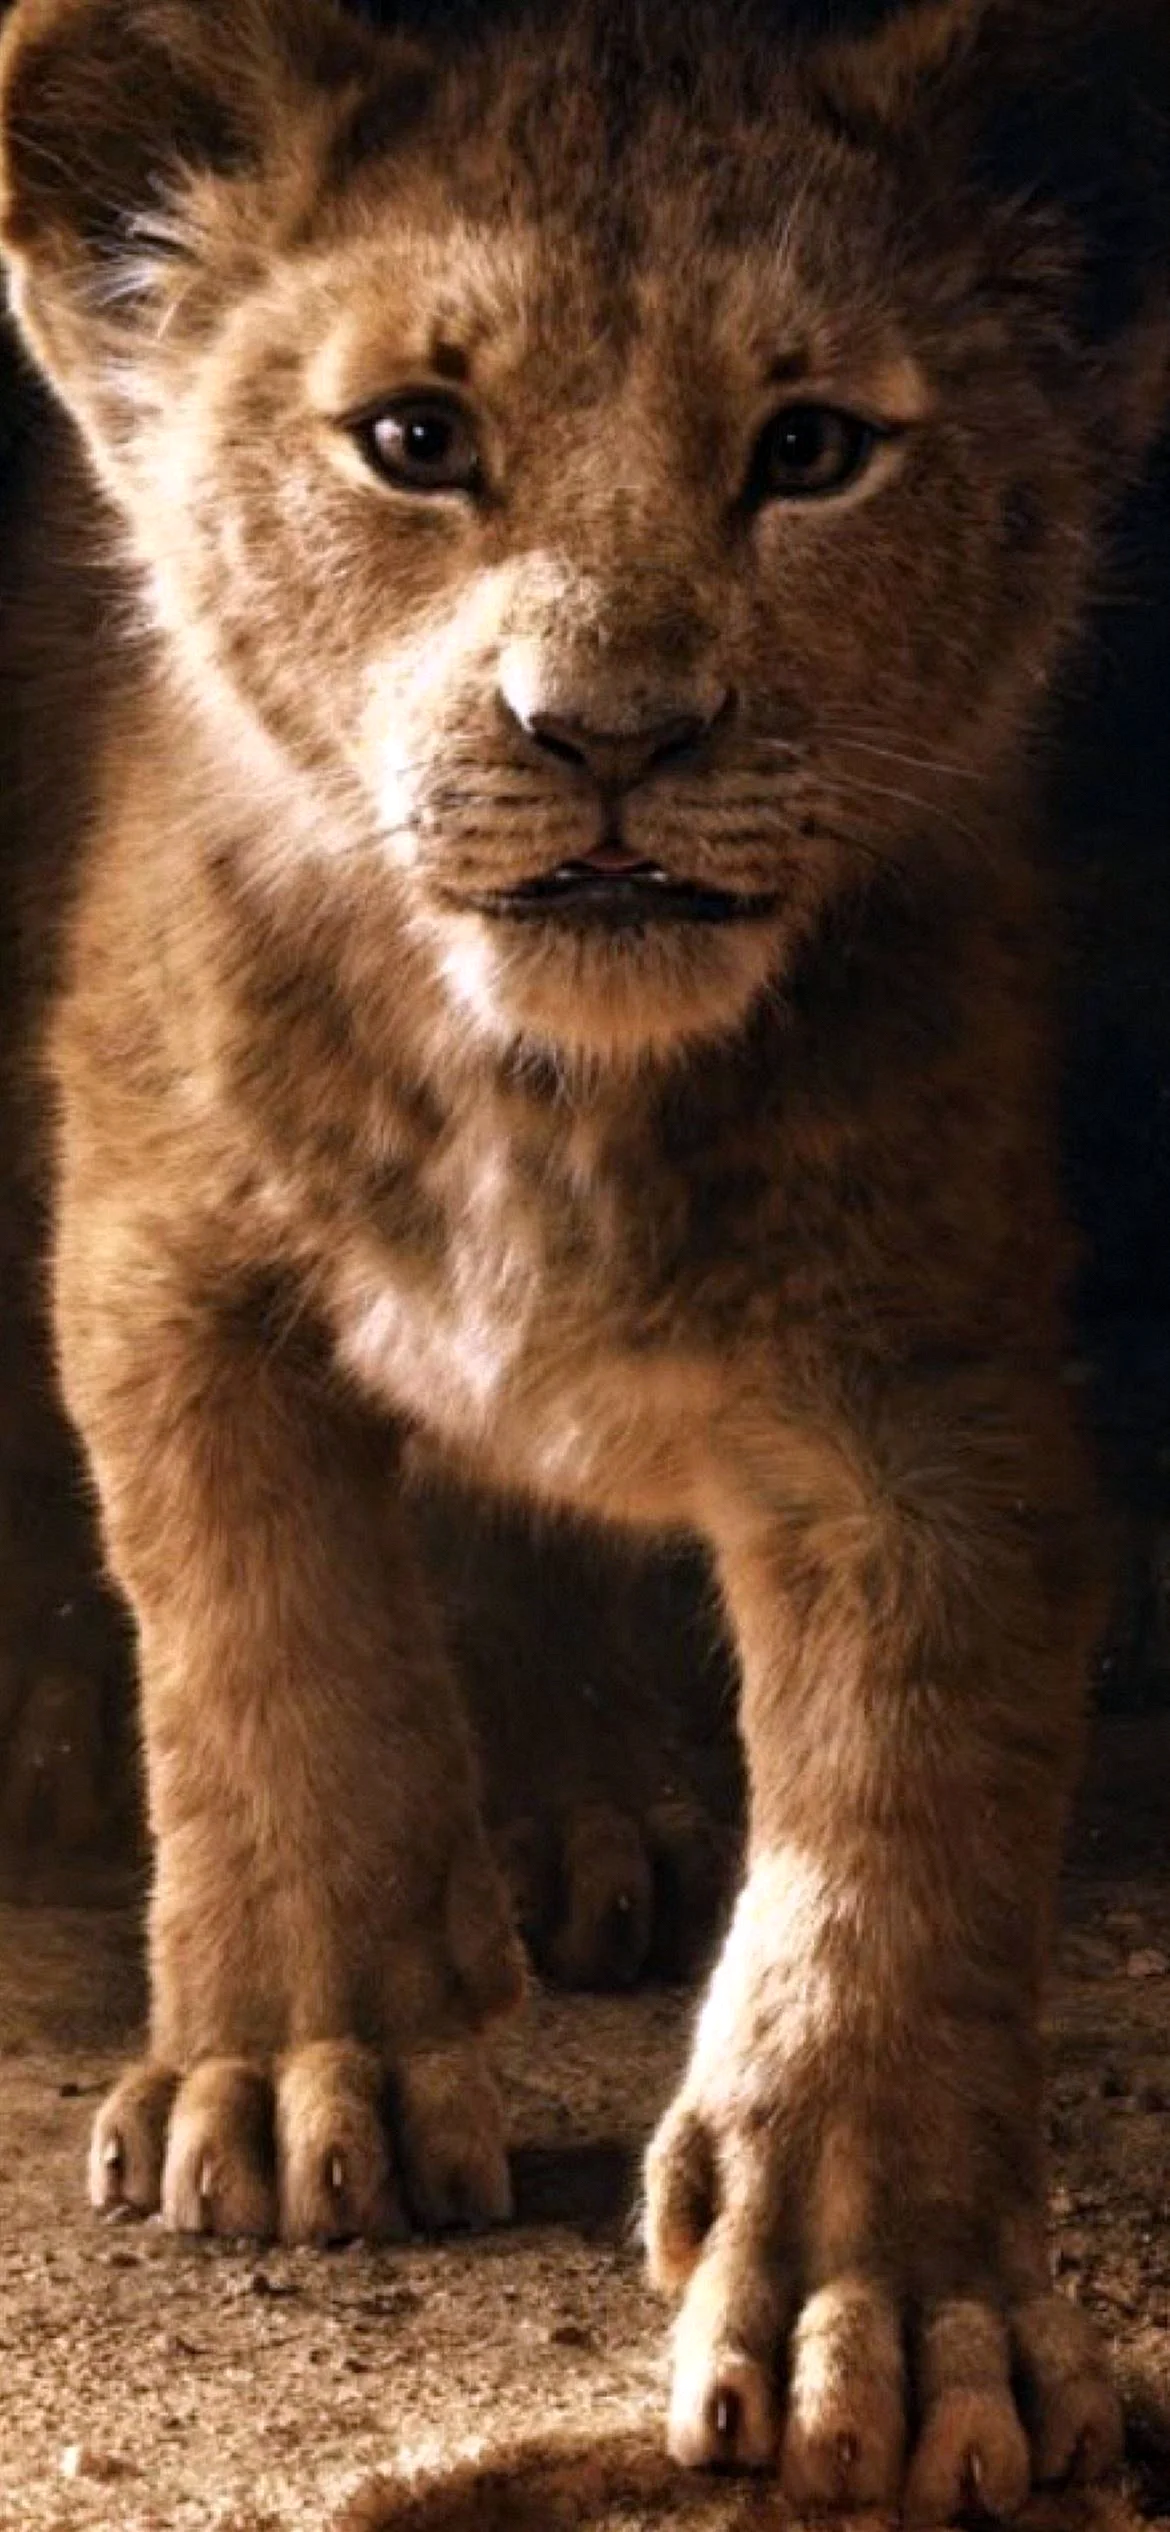 The Lion King 2019 Wallpaper for iPhone 13 Pro